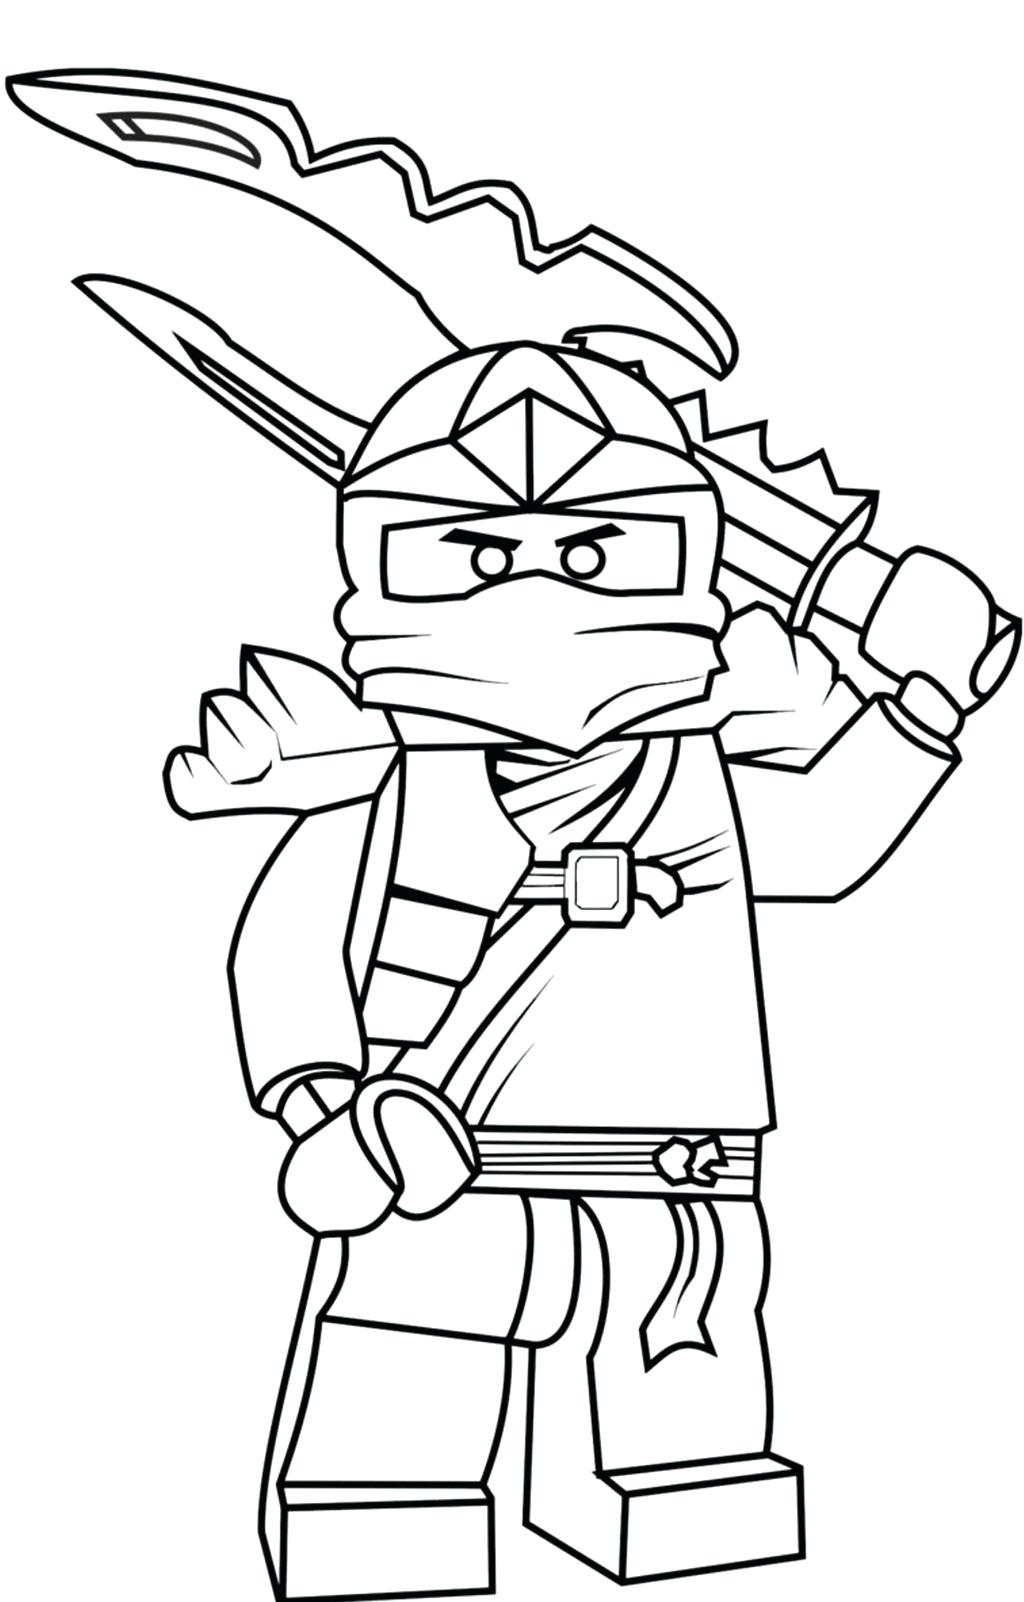 Cartoon Network Coloring Pages To Print Cartoon Network Coloring Pages To Print Reddogsheetco